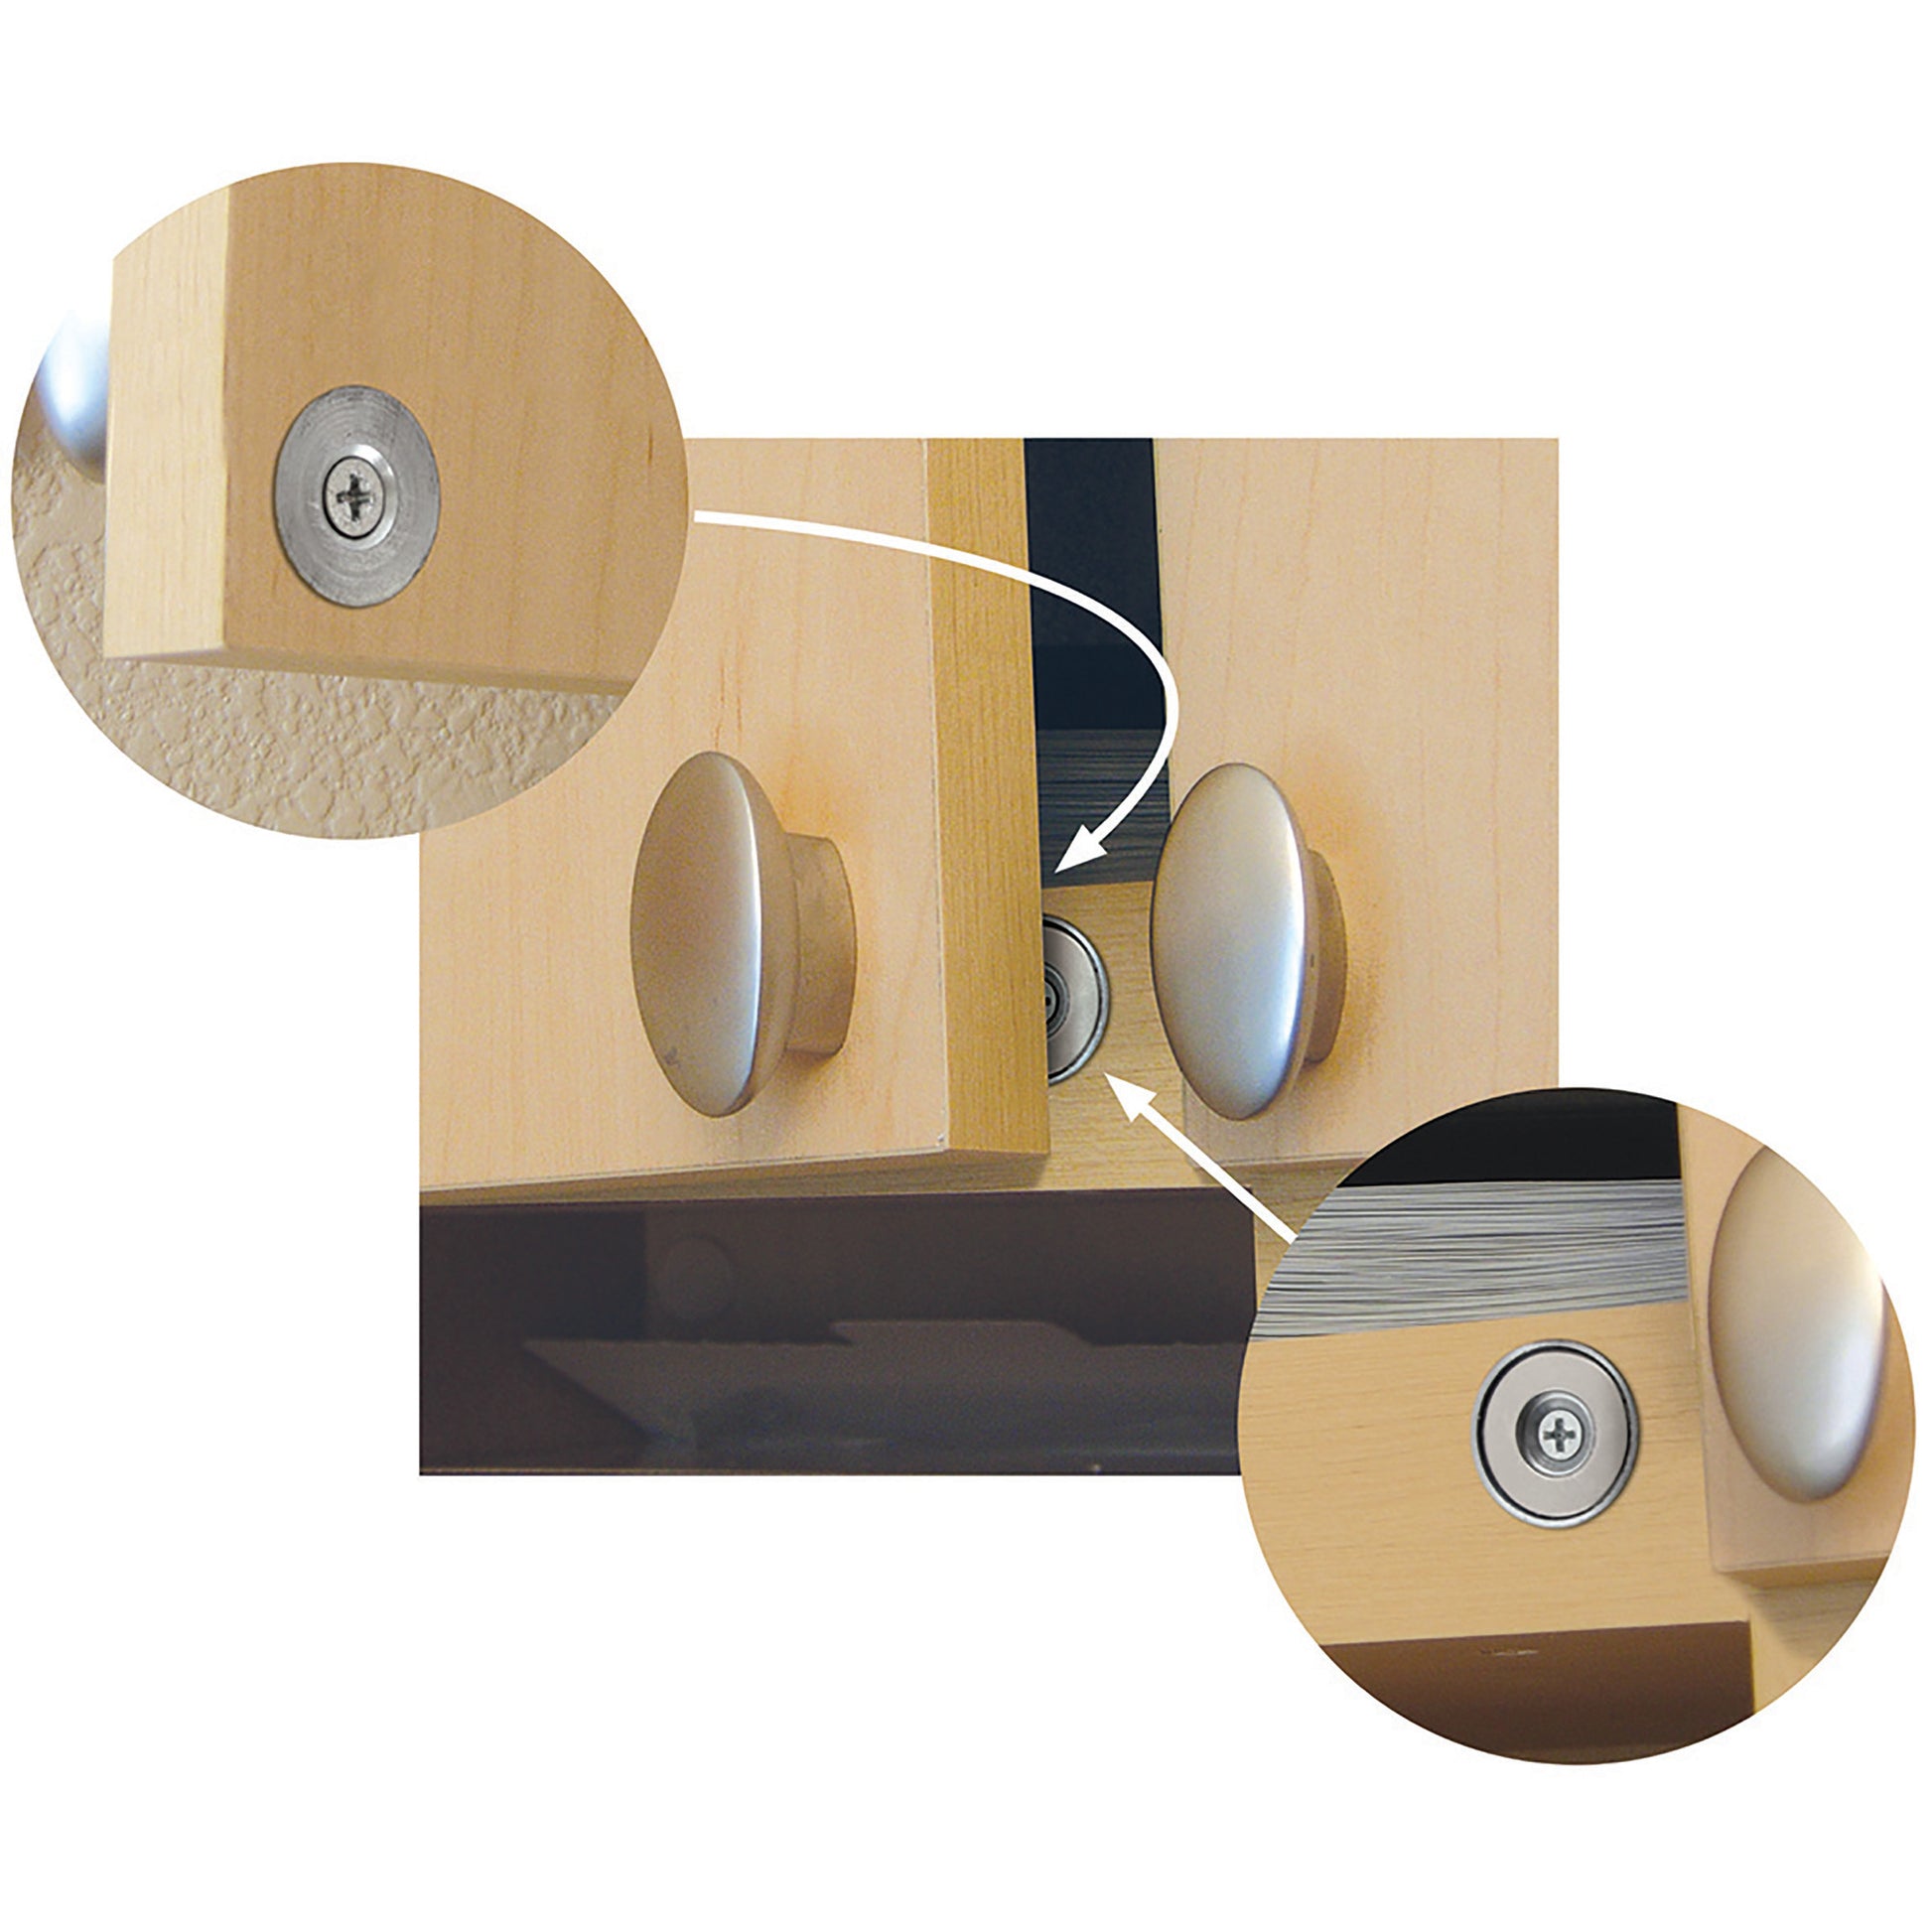 Load image into Gallery viewer, NMLKIT5 Neodymium Latch Magnet Kit (1 set) - In Use View Inside Cabinet Door